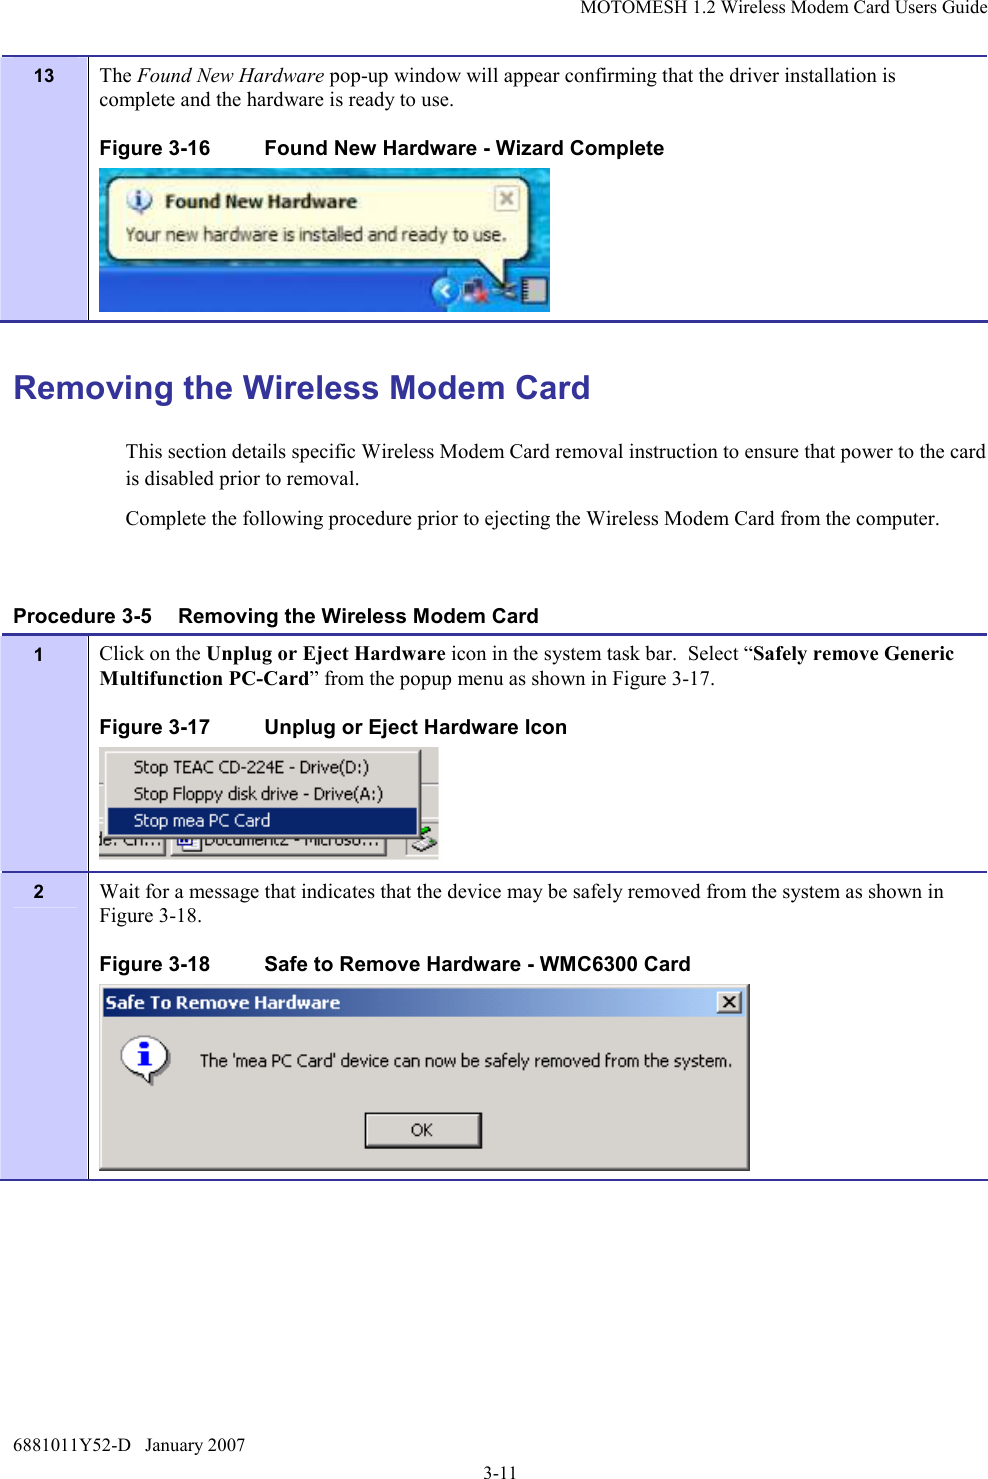 MOTOMESH 1.2 Wireless Modem Card Users Guide 6881011Y52-D   January 2007 3-11 13  The Found New Hardware pop-up window will appear confirming that the driver installation is complete and the hardware is ready to use. Figure 3-16  Found New Hardware - Wizard Complete  Removing the Wireless Modem Card This section details specific Wireless Modem Card removal instruction to ensure that power to the card is disabled prior to removal. Complete the following procedure prior to ejecting the Wireless Modem Card from the computer.  Procedure 3-5  Removing the Wireless Modem Card 1  Click on the Unplug or Eject Hardware icon in the system task bar.  Select “Safely remove Generic Multifunction PC-Card” from the popup menu as shown in Figure 3-17. Figure 3-17  Unplug or Eject Hardware Icon  2  Wait for a message that indicates that the device may be safely removed from the system as shown in Figure 3-18. Figure 3-18  Safe to Remove Hardware - WMC6300 Card  